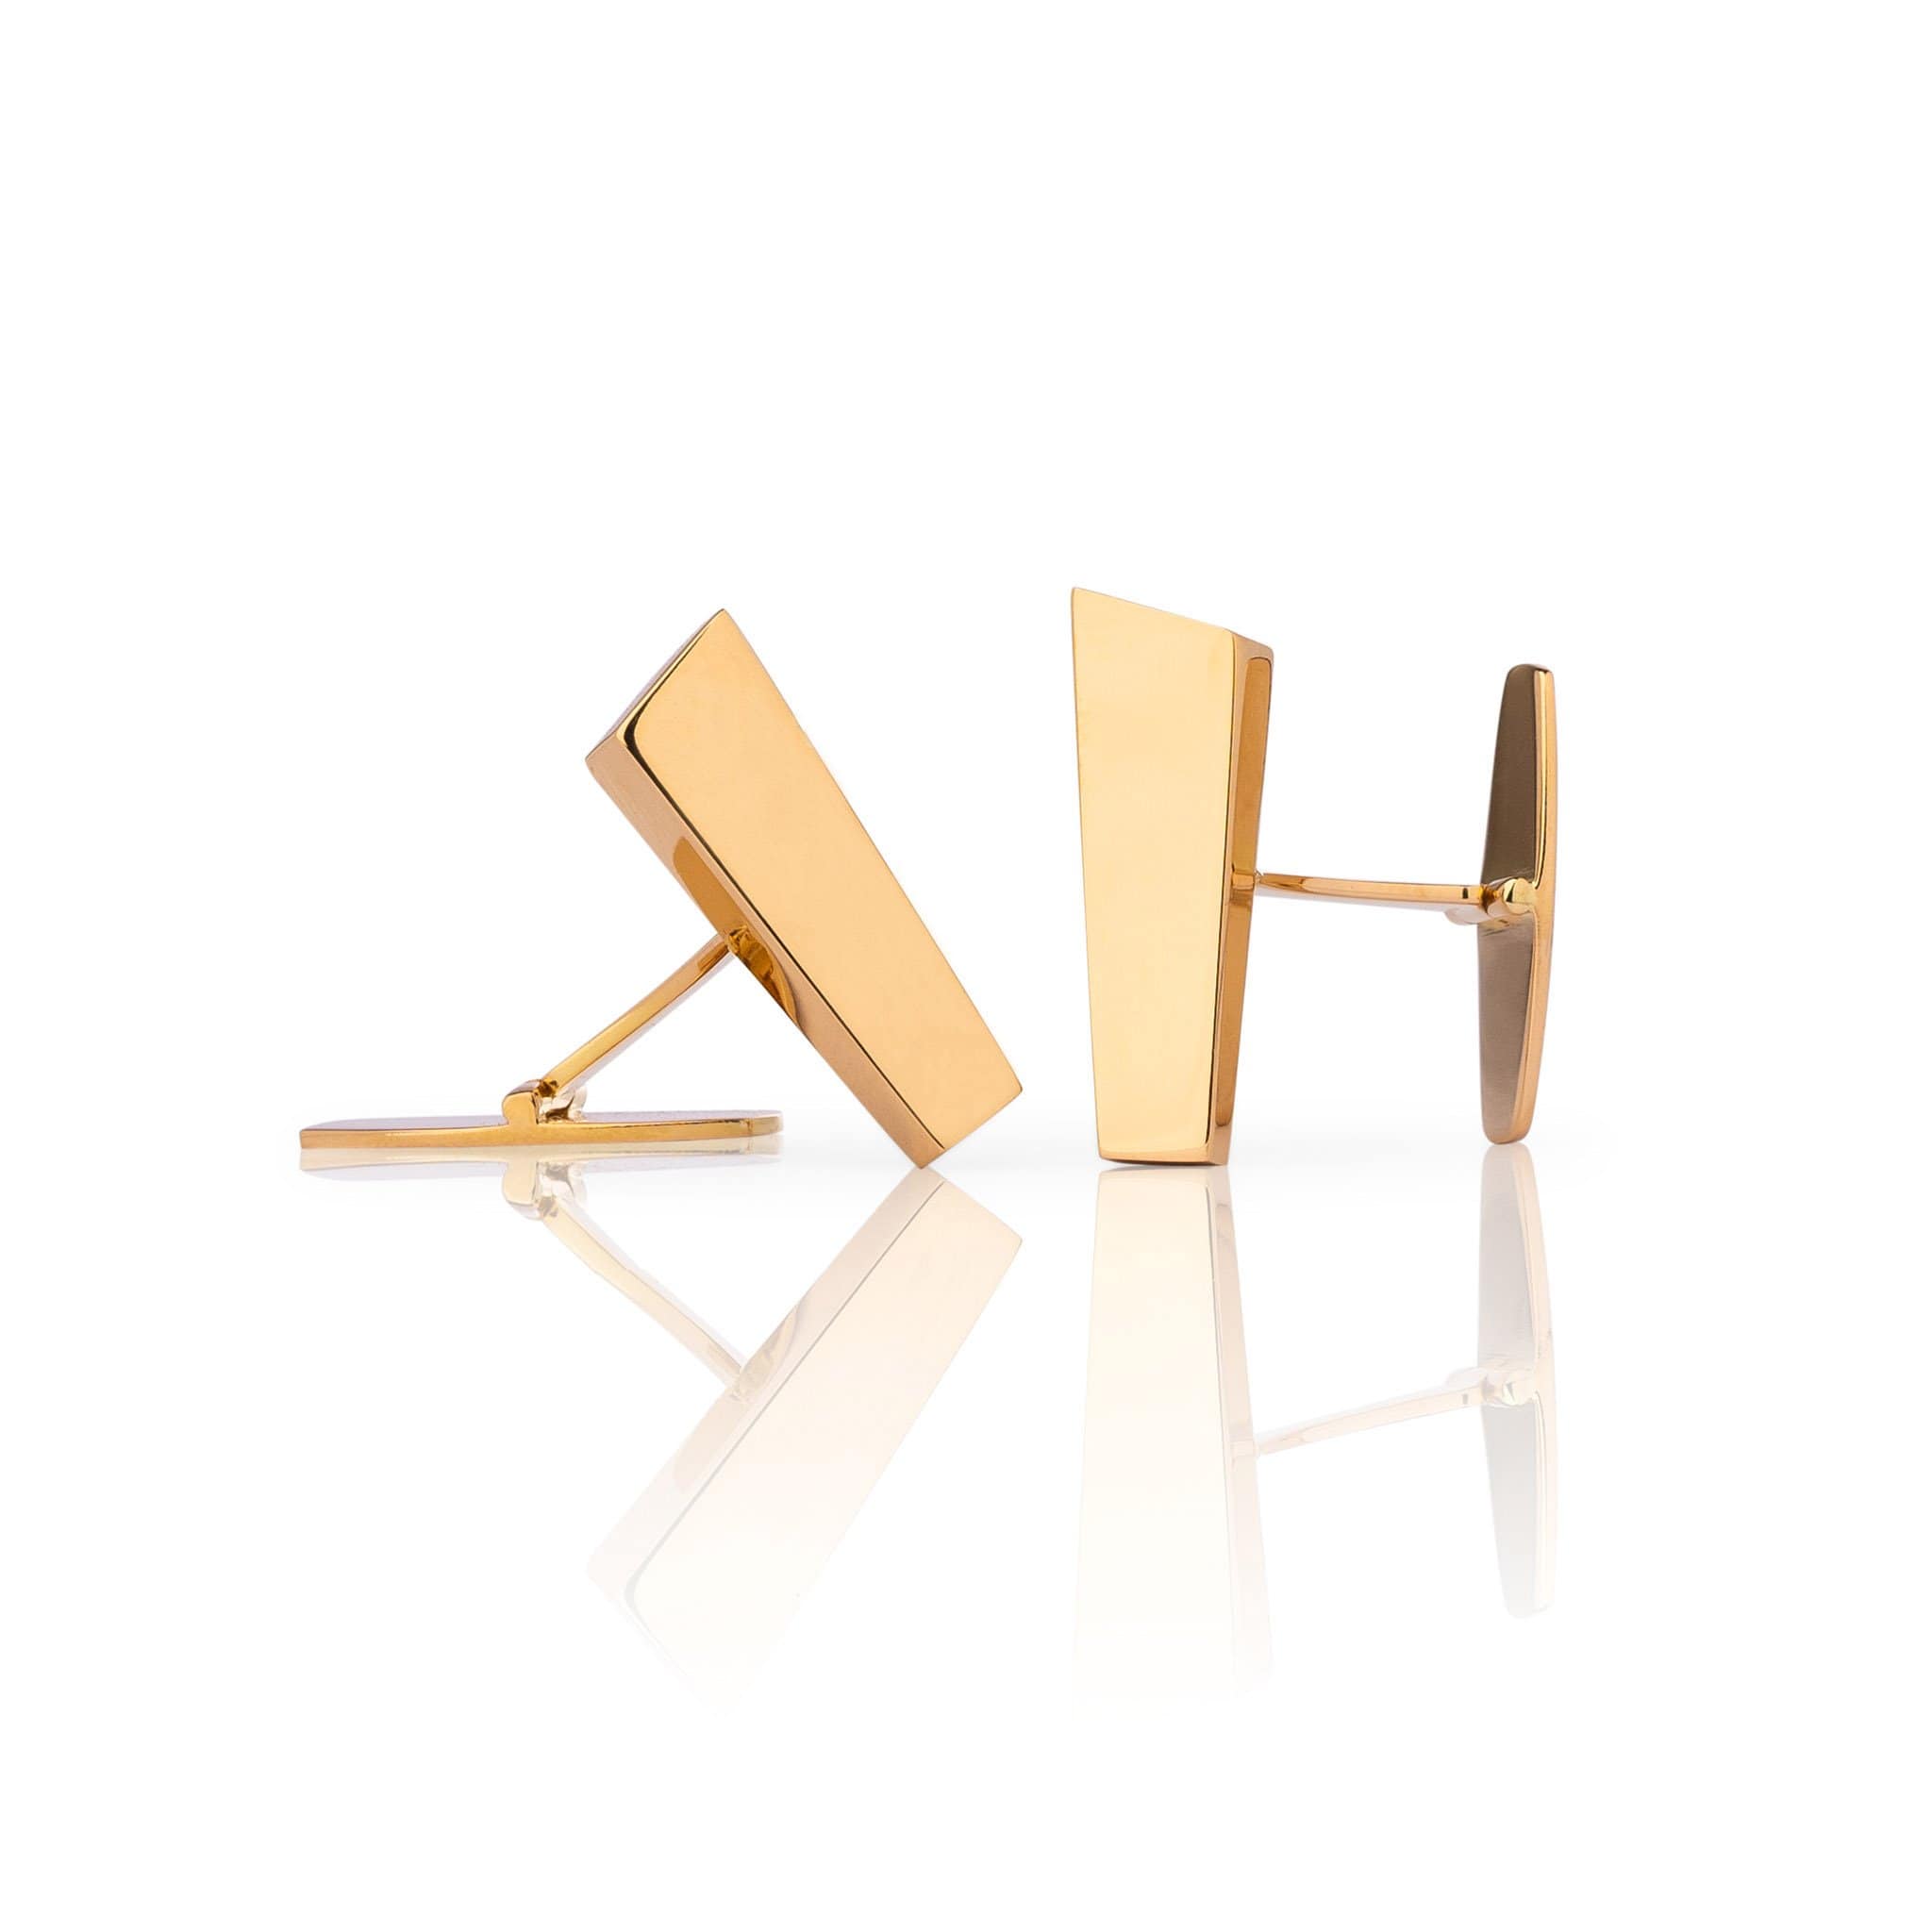 Exclusive cufflinks crafted from 14k gold inspired by the Pulpit Rock